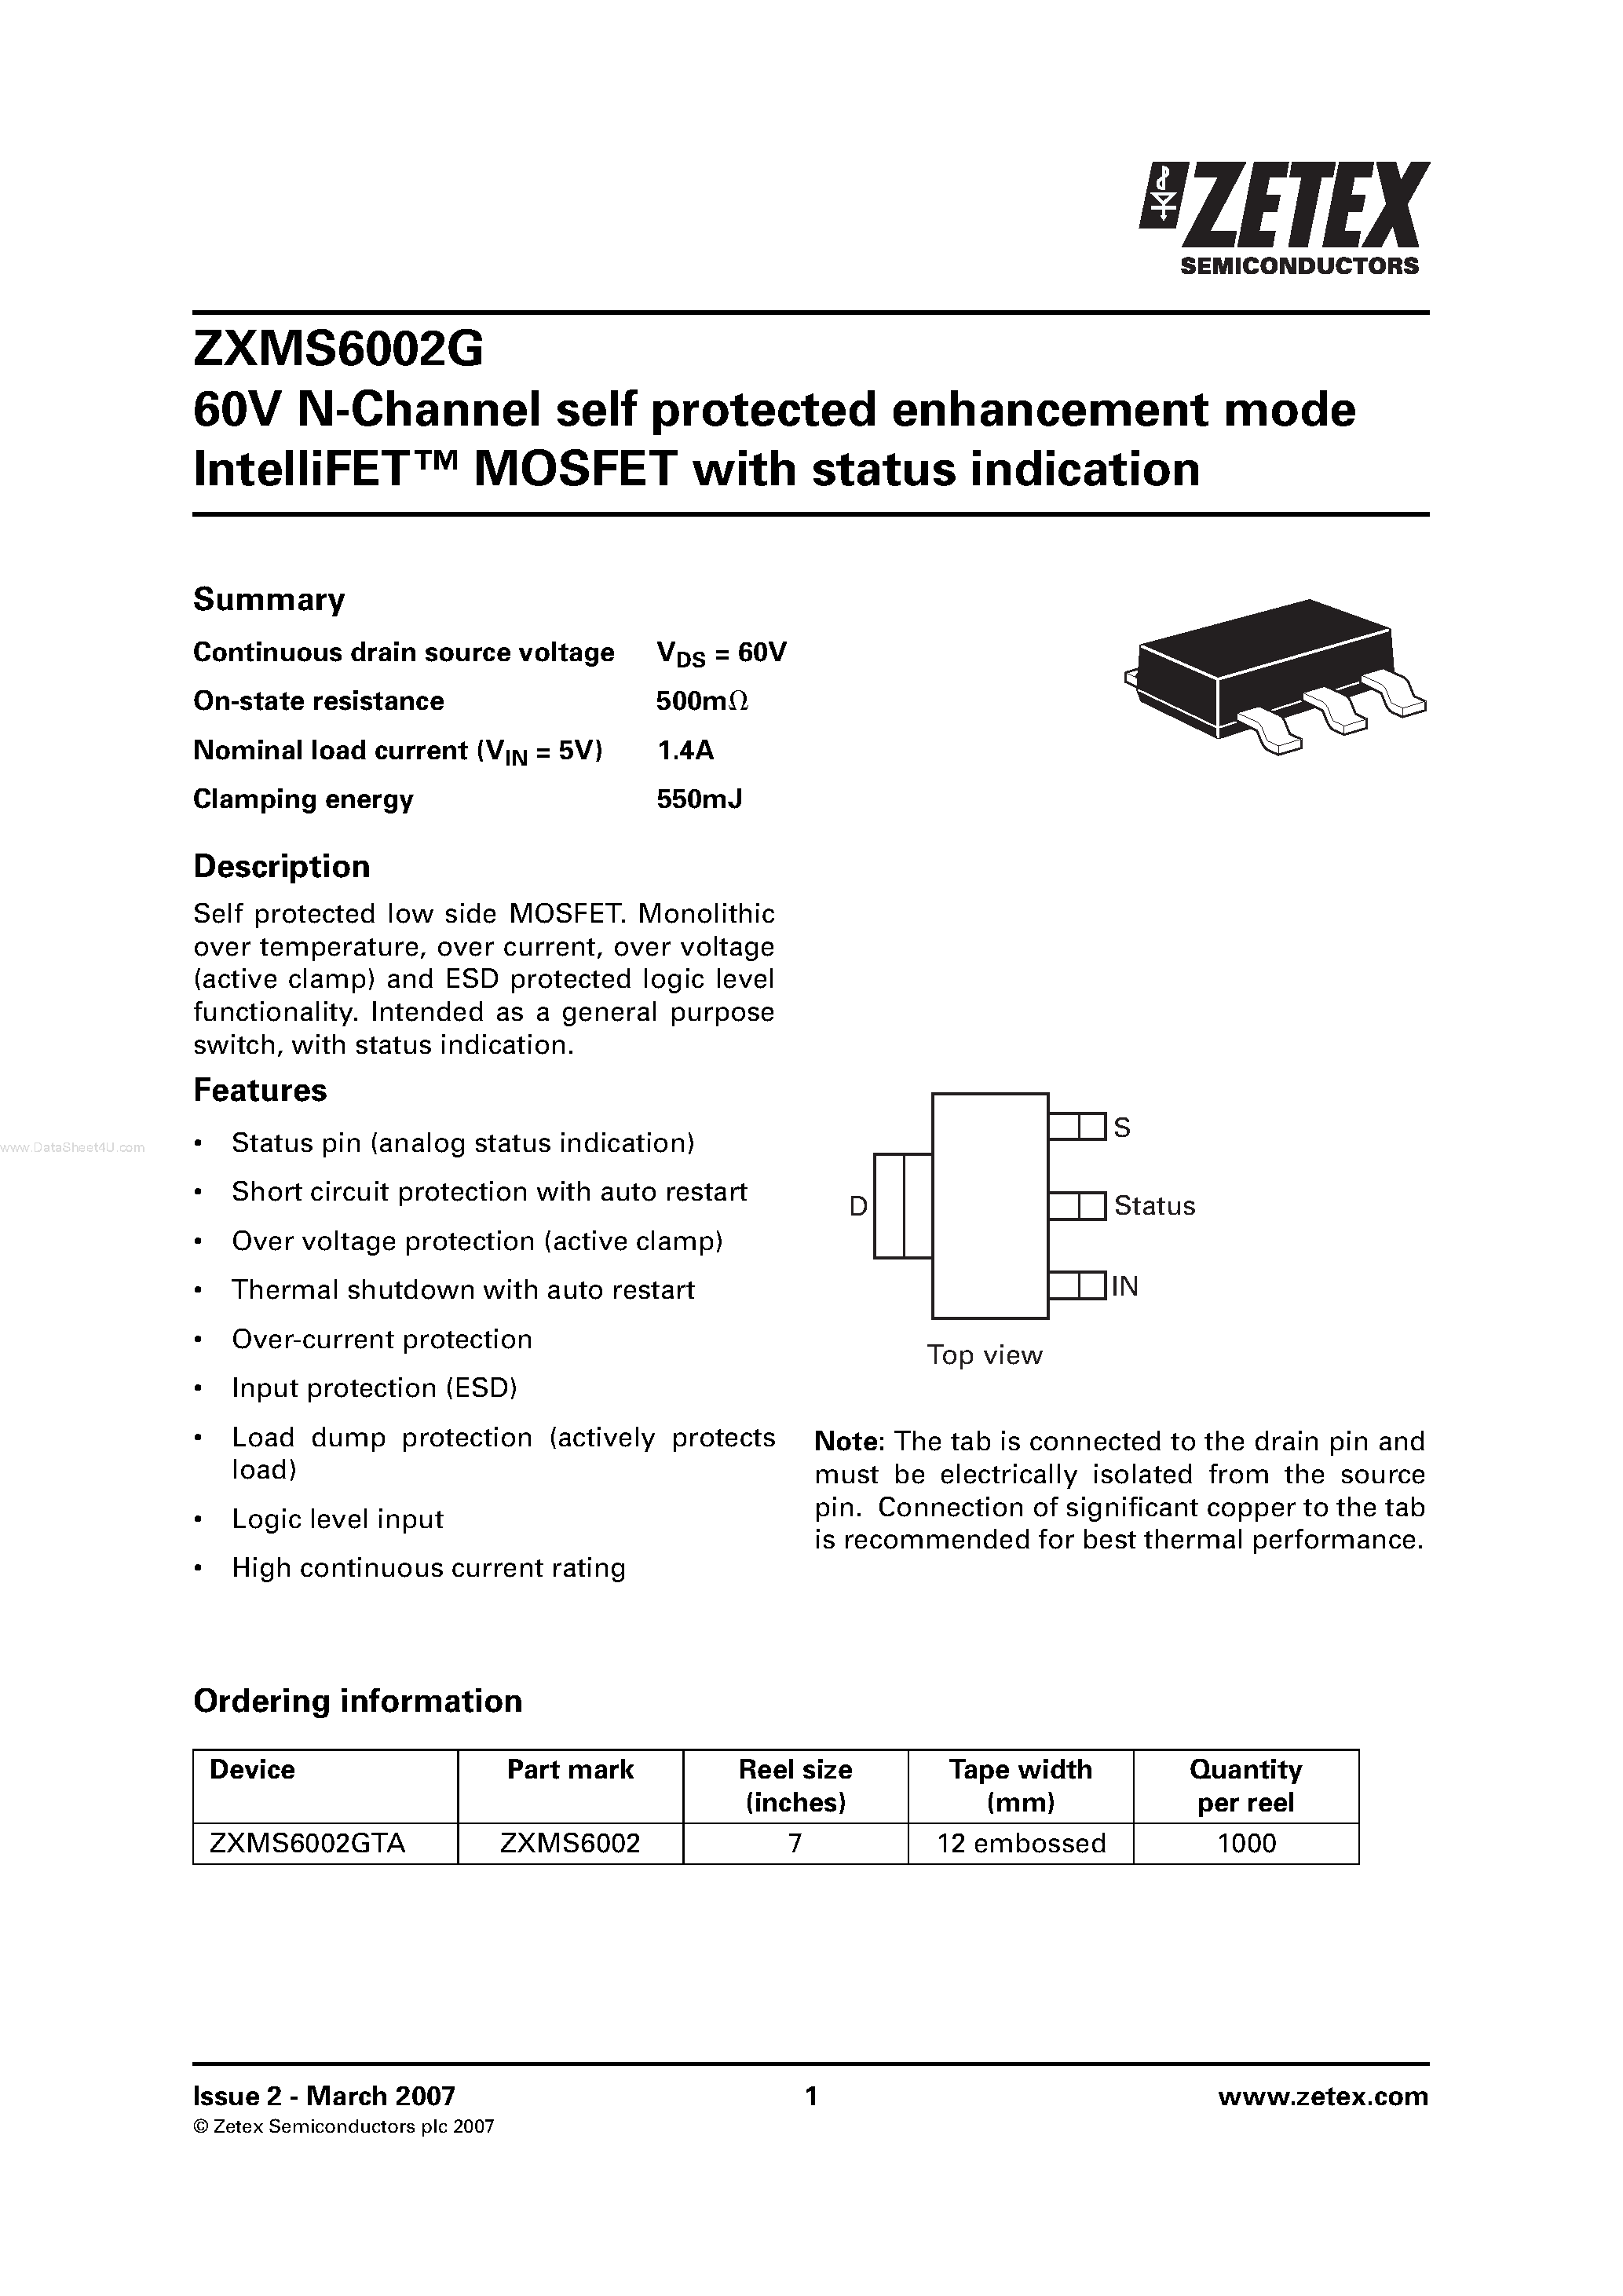 Даташит ZXMS6002G - N-Channel self protected enhancement mode IntelliFET MOSFET страница 1